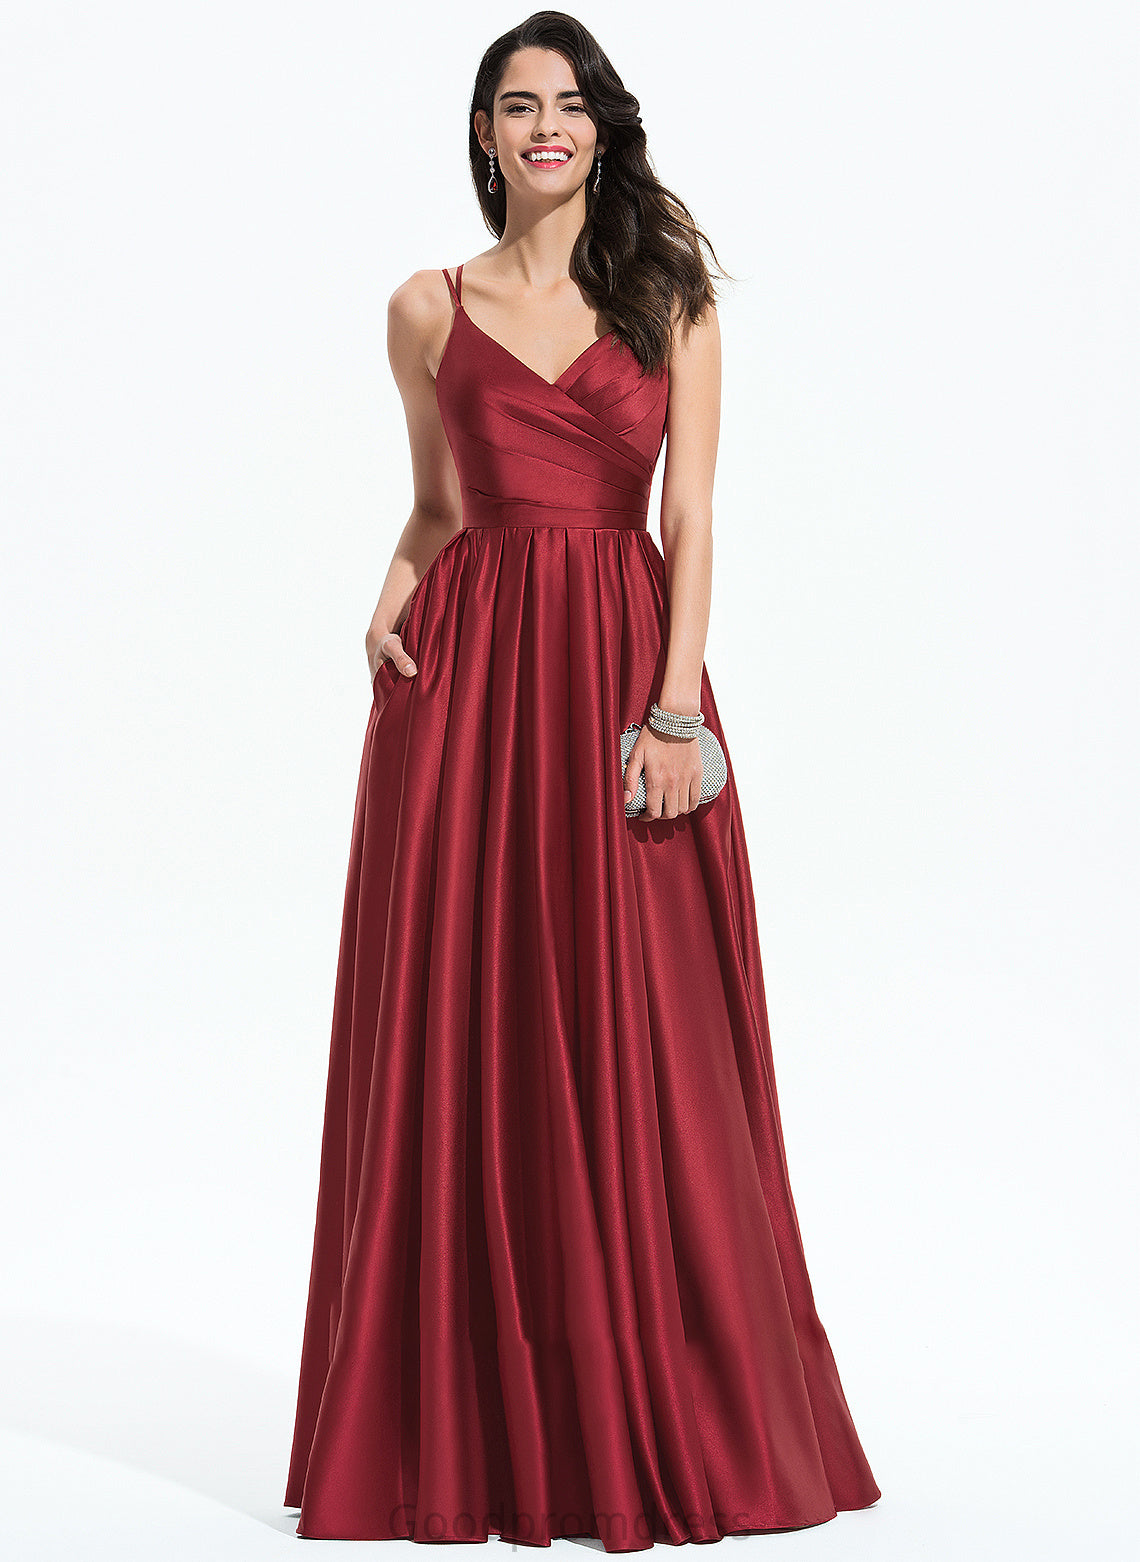 A-Line Pockets Prom Dresses Satin With Floor-Length Ruffle V-neck Kirsten